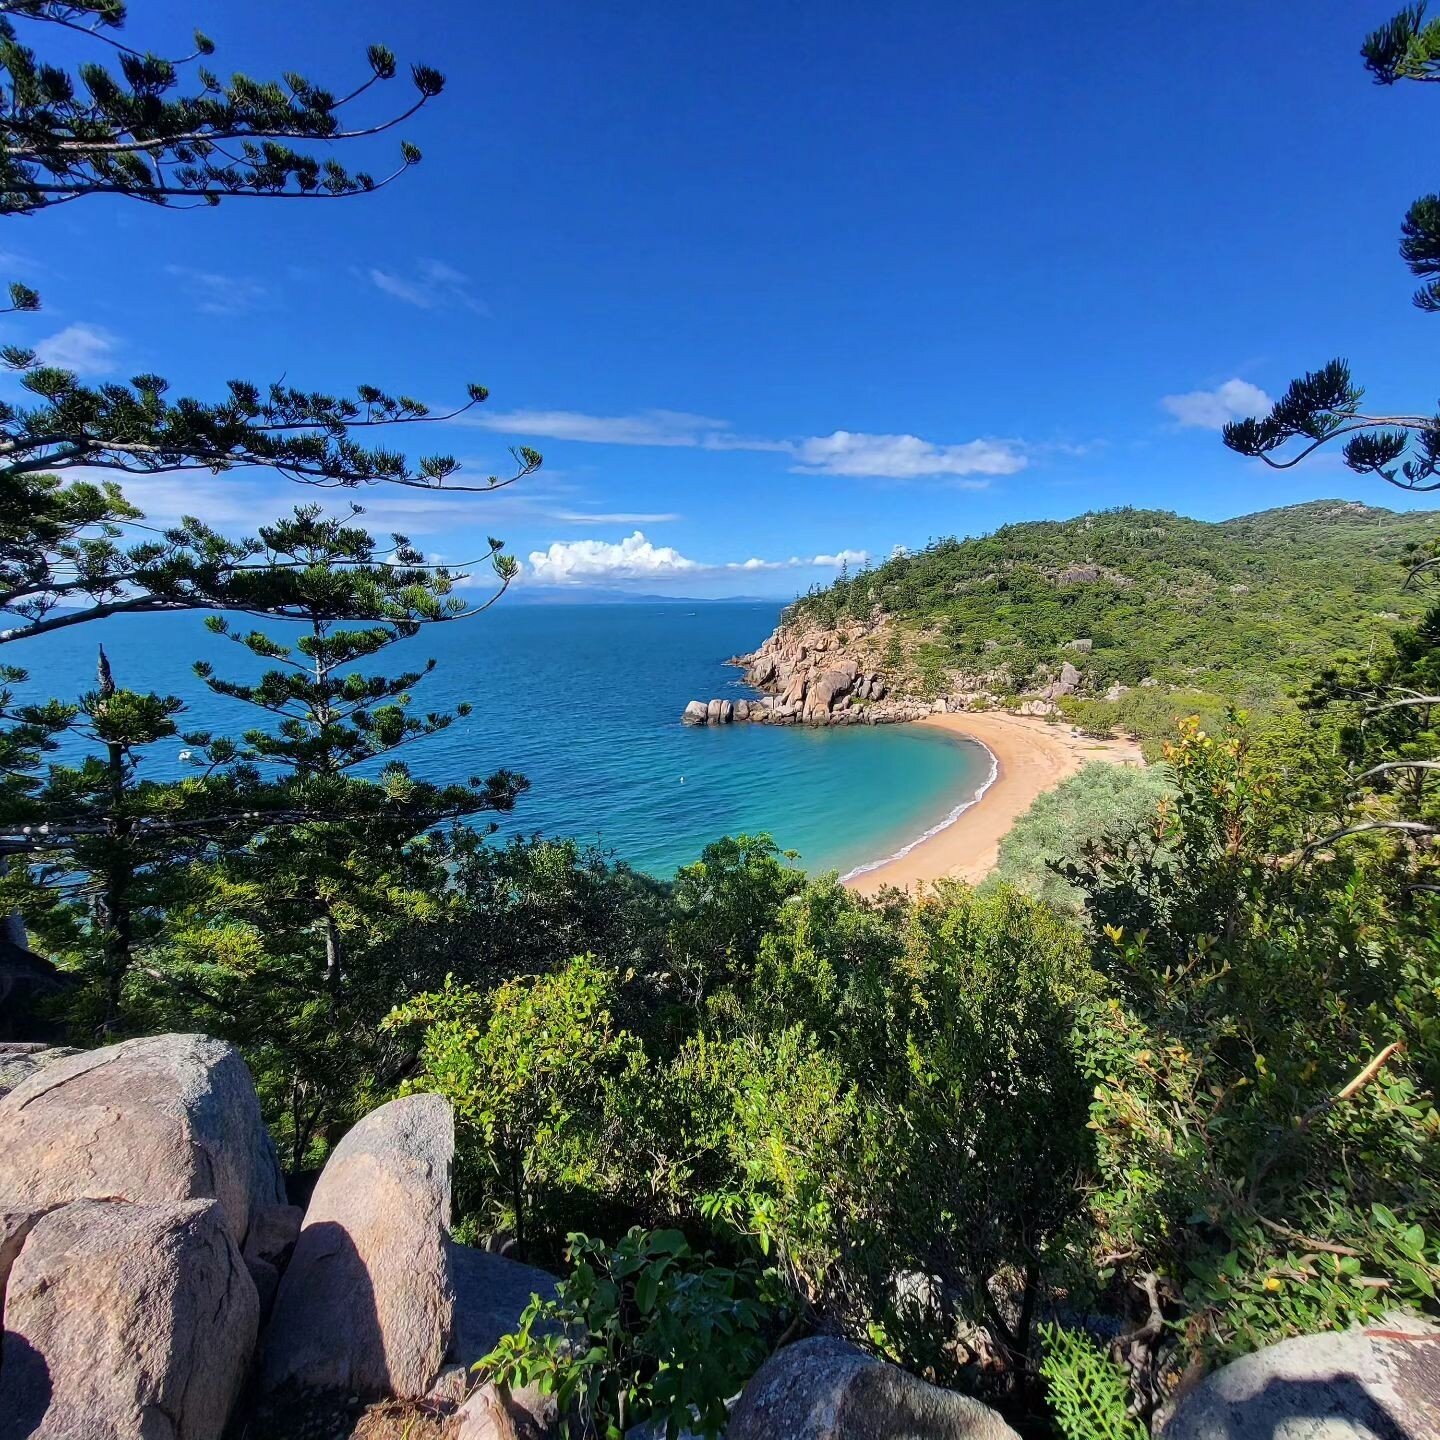 We'll never tire of this view 🌿⁠
⁠
Photo via @lillie_aroundtheworld⁠
⁠
#thisismagneticisland #upforunexpected #magneticisland #townsvillenorthqueensland #queensland #australia #townsville #townsvilleshines #thisisqueensland #seeaustralia #discoverqu